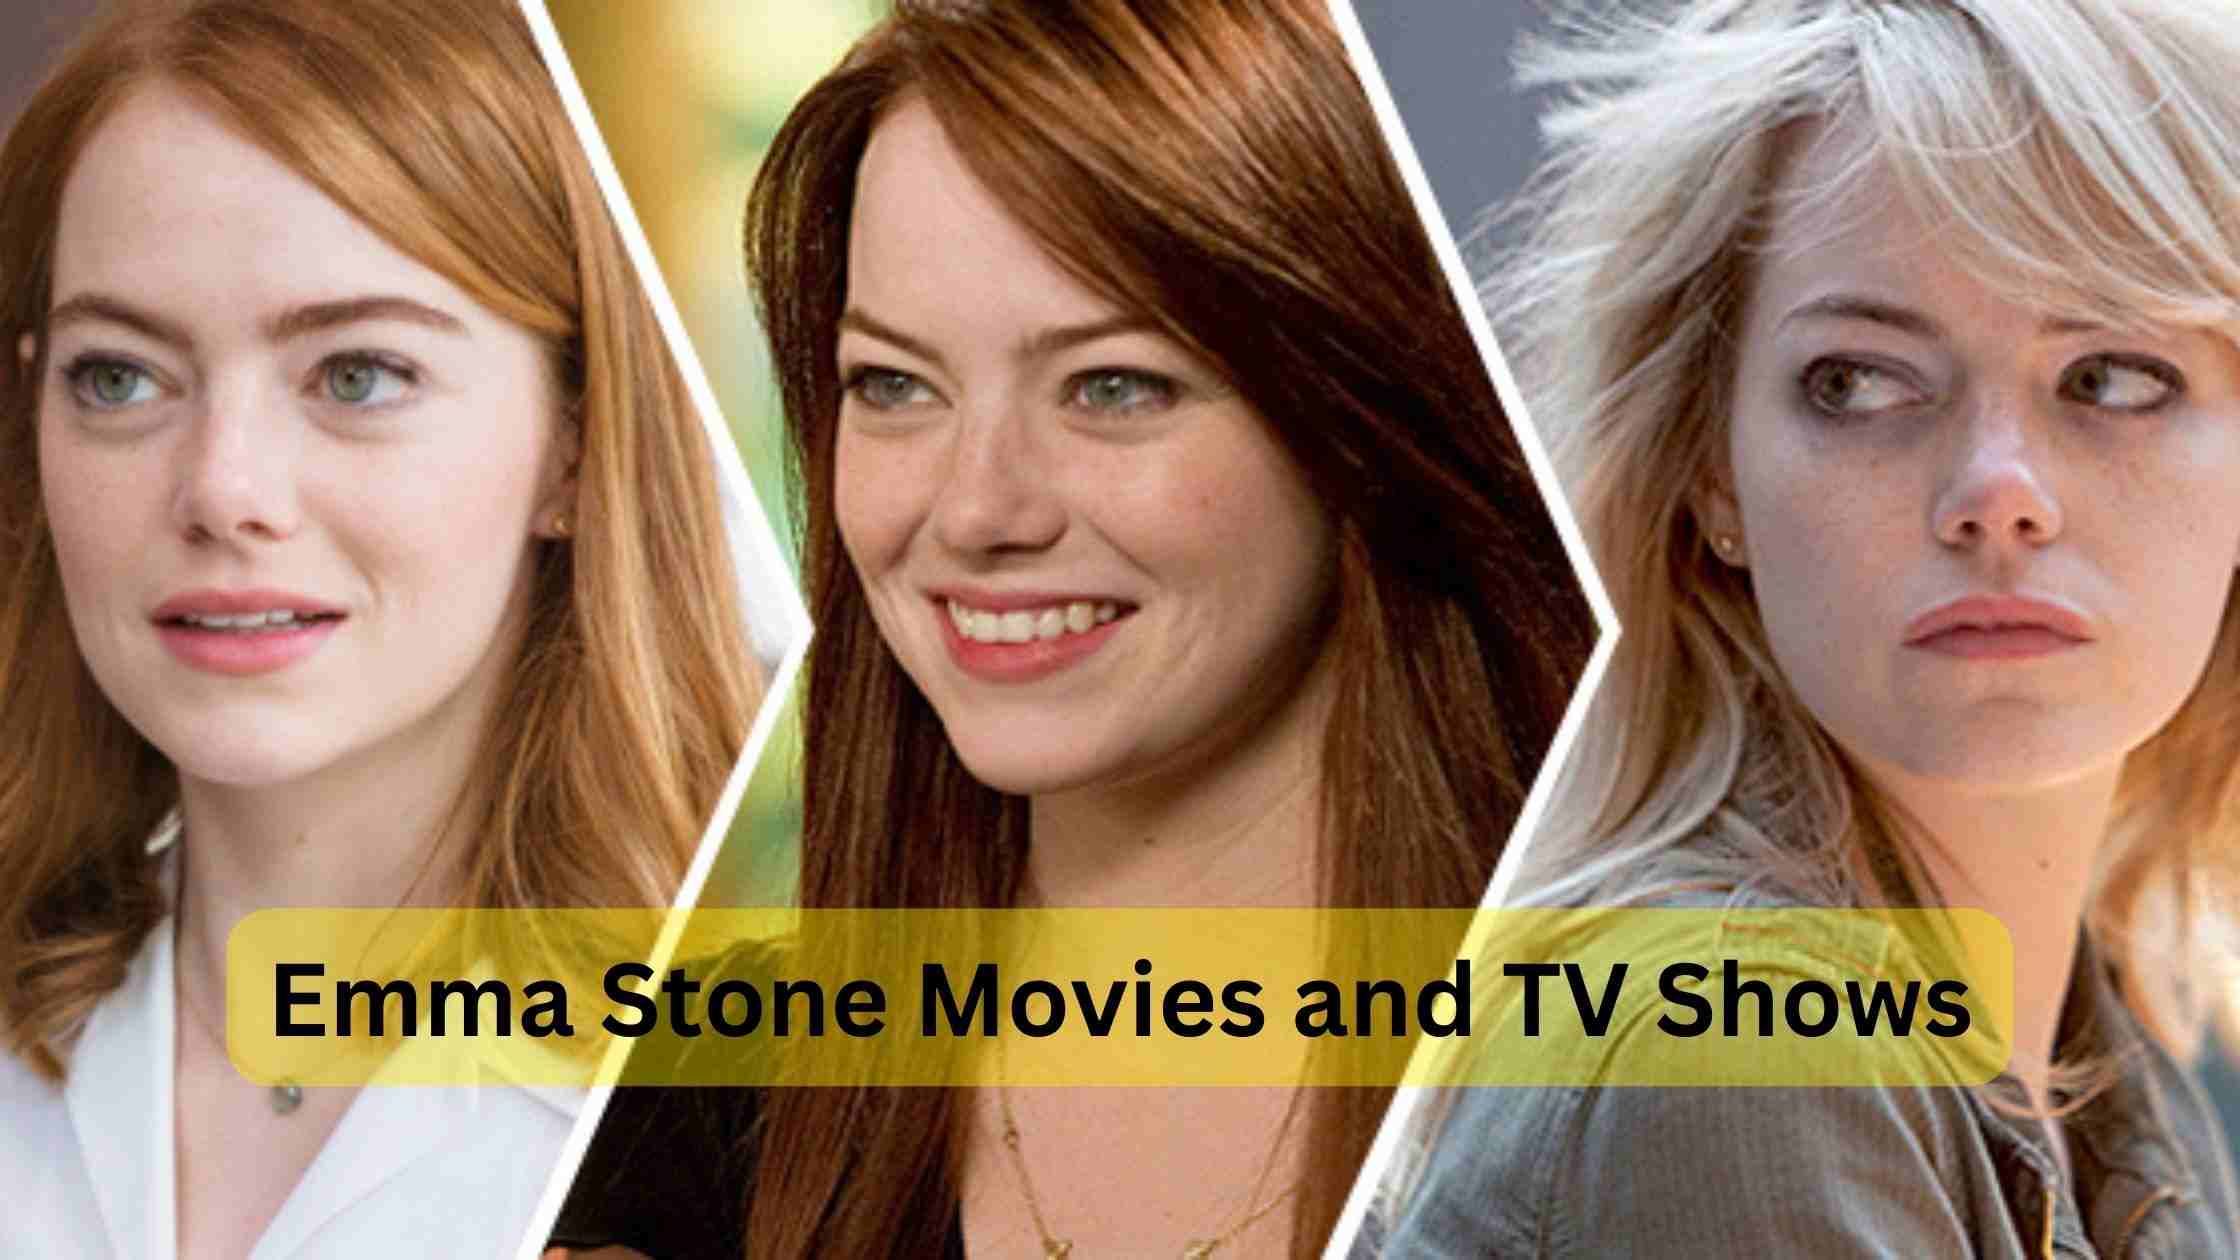 Emma Stone Movies and TV Shows